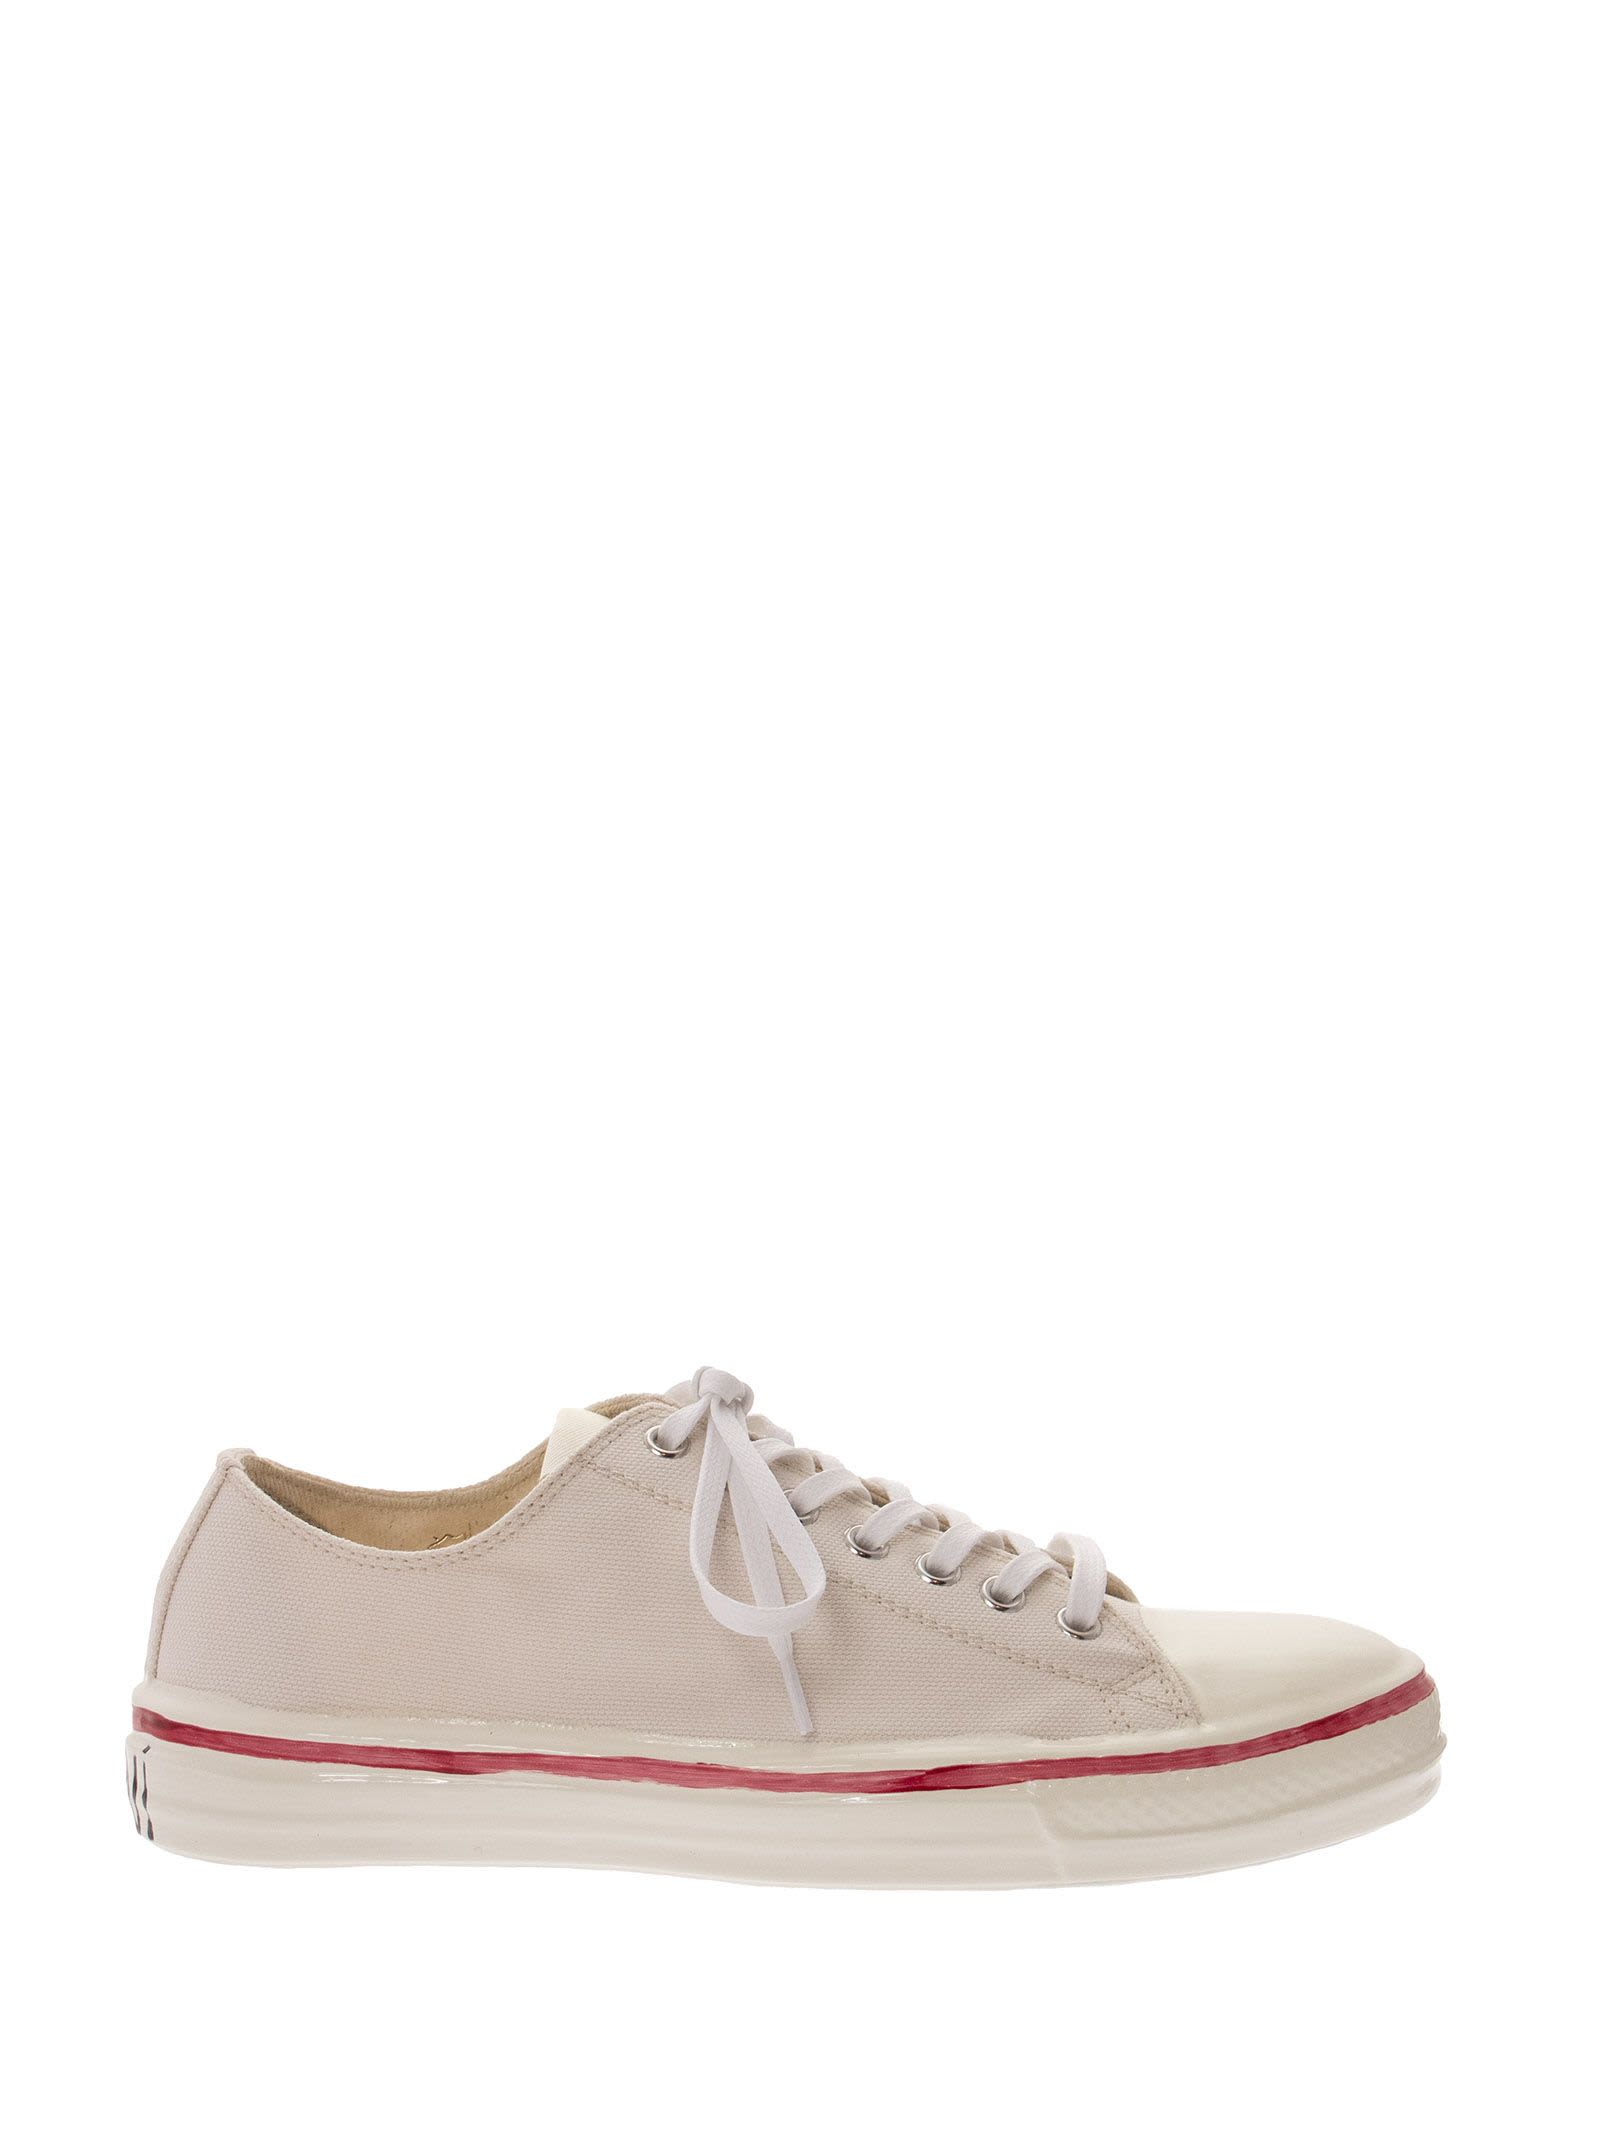 Buy Marni Gooey - Low-top Sneakers In Canvas And Rubber online, shop Marni shoes with free shipping